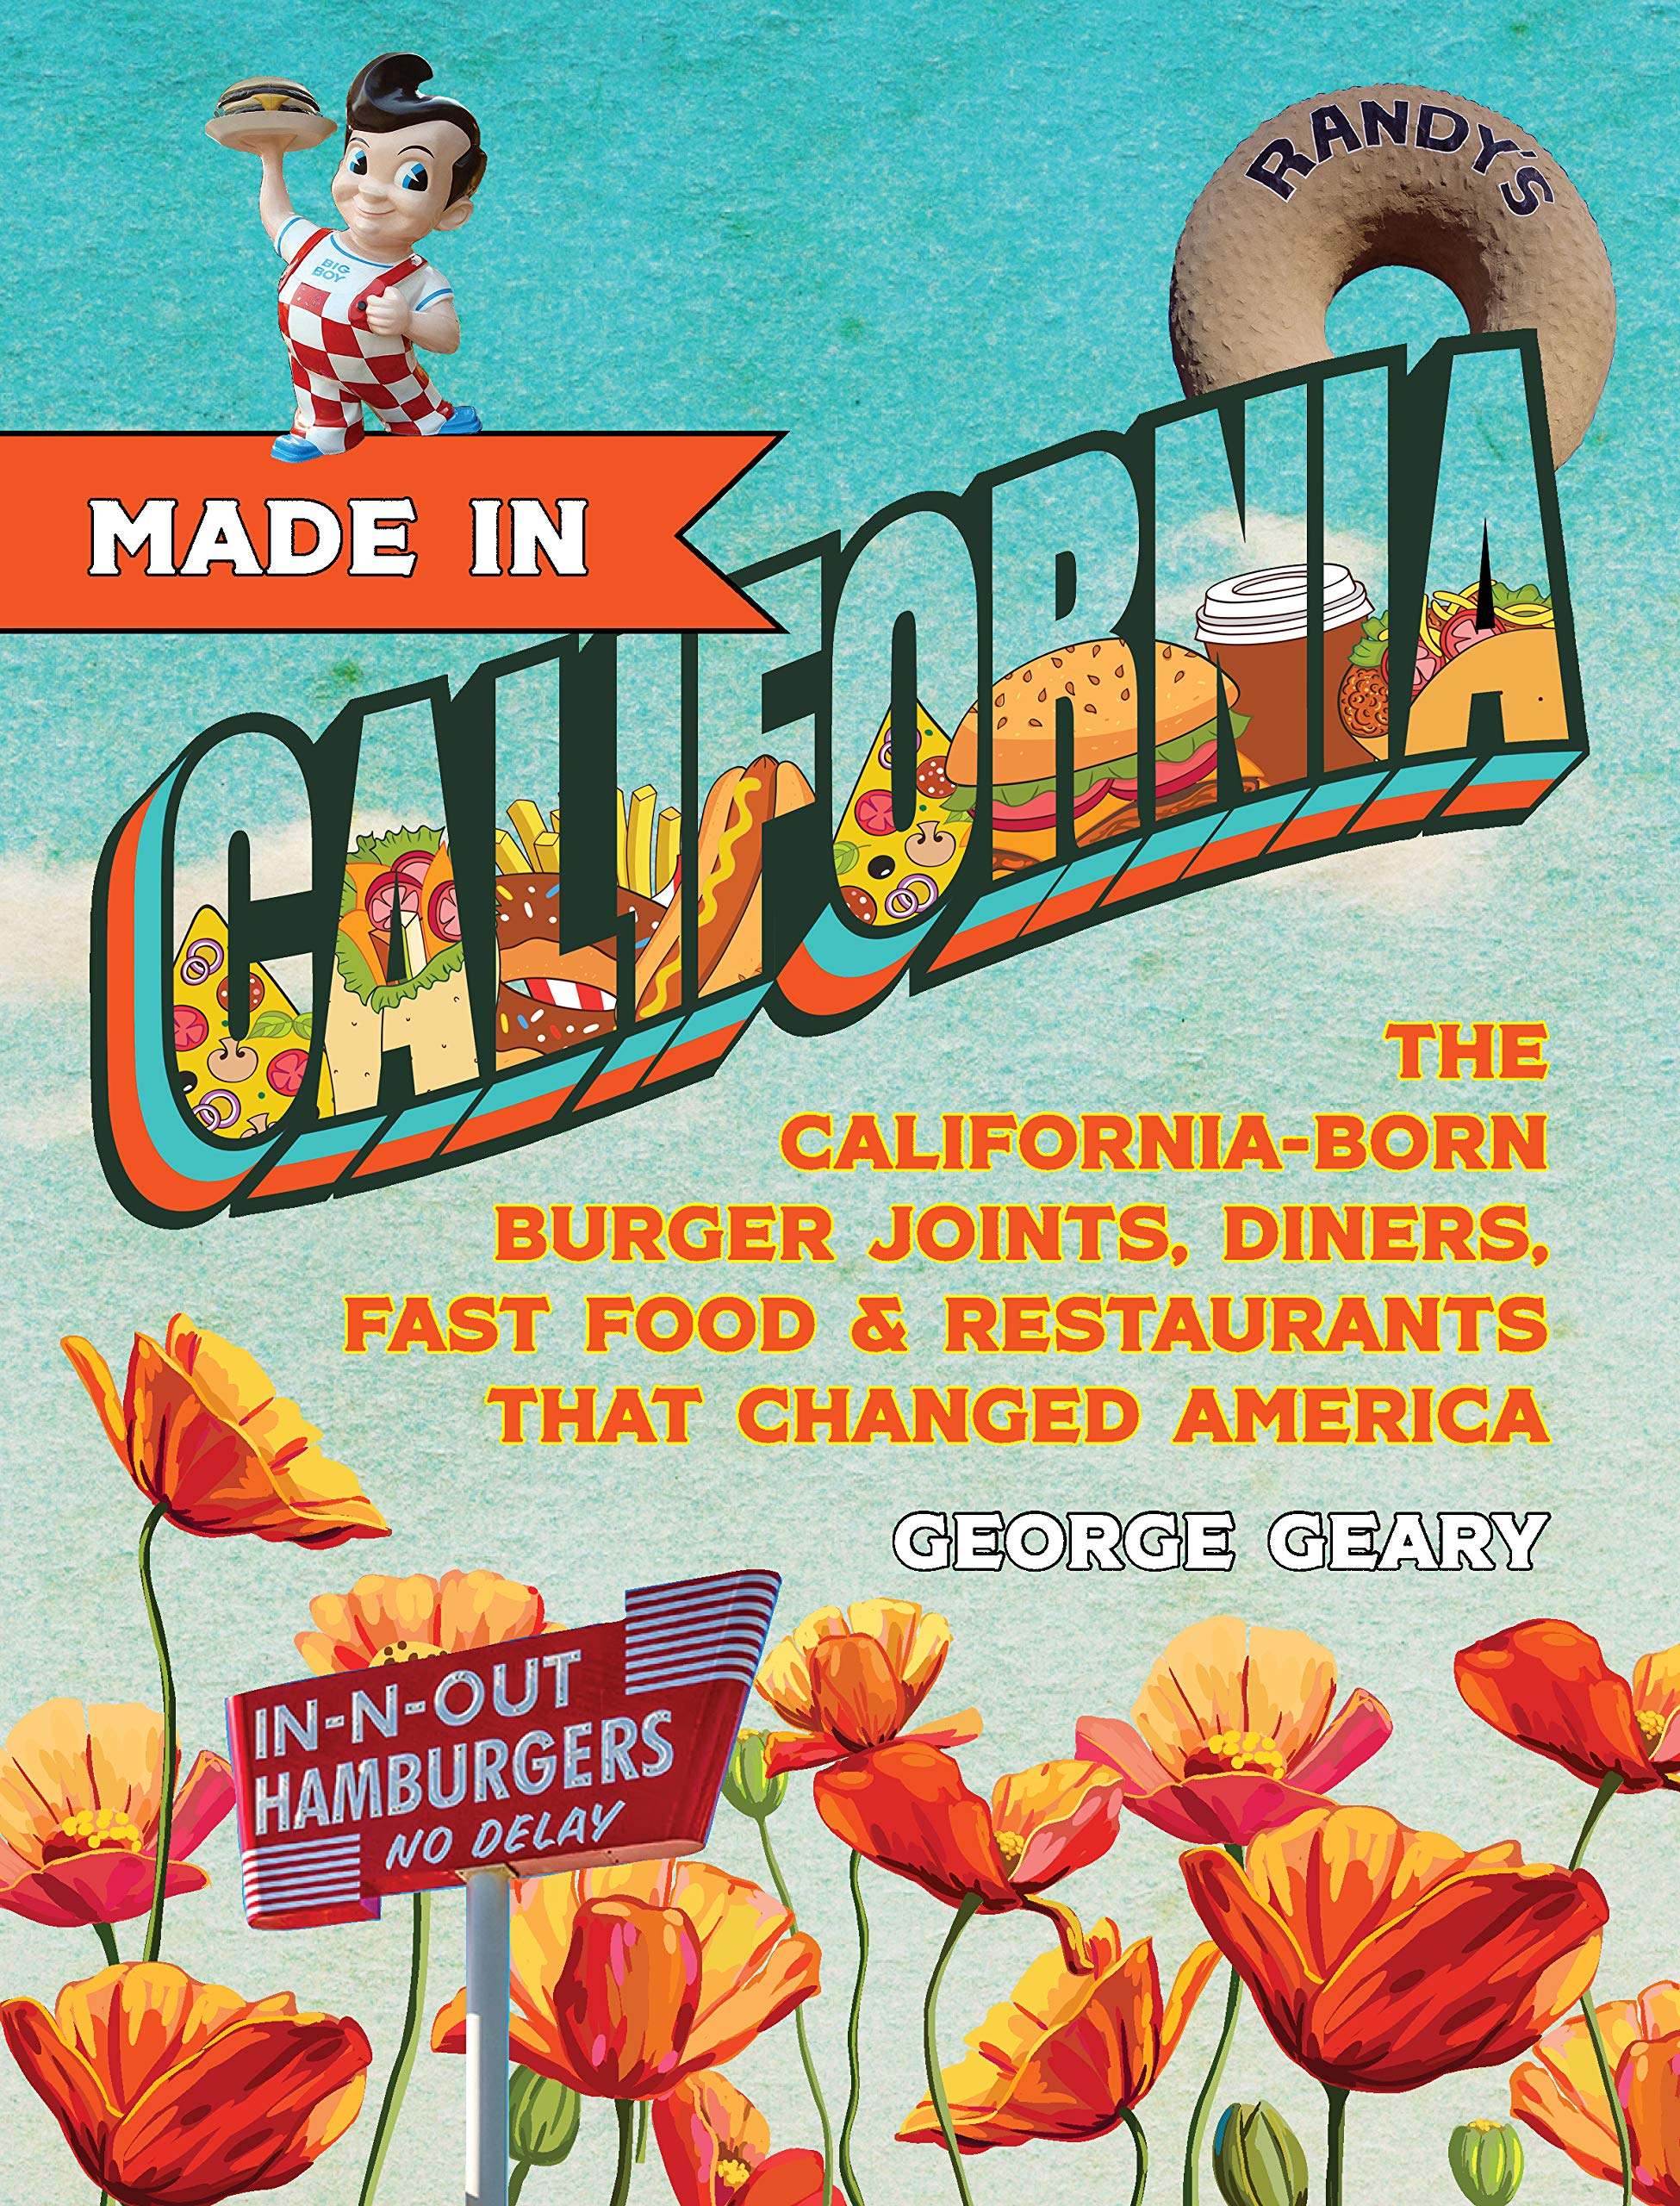 Made In California: The California-Born Diners, Burger Joints, Restaurants & Fast Food that Changed America (George Geary)